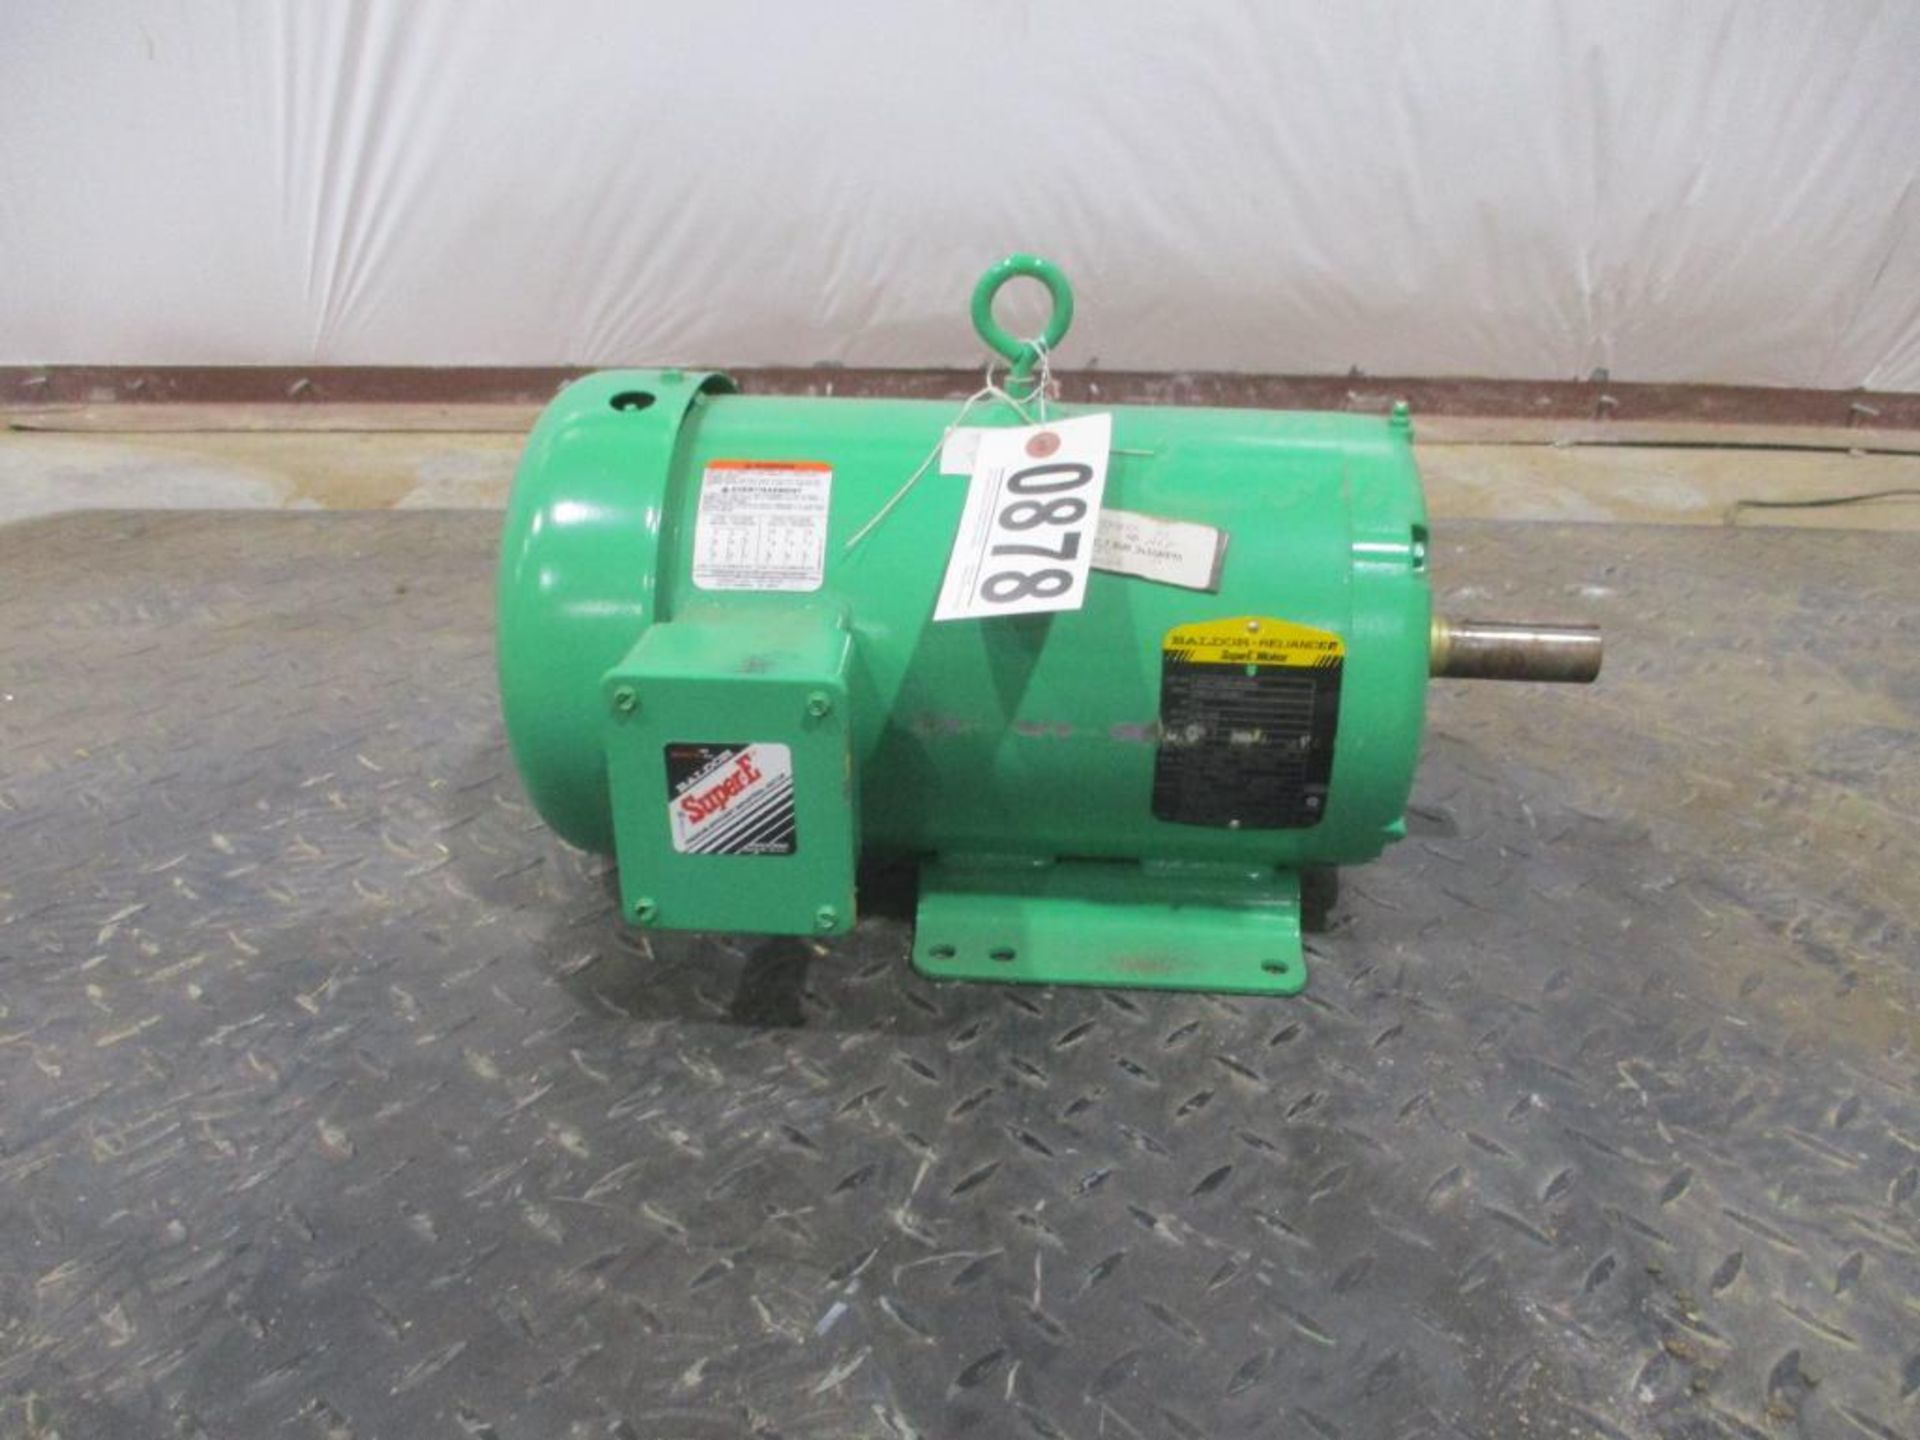 BALDOR 3 PHASE 7.5HP 184T FRAME A/C MOTOR P/N 1200712332-000020, 91# lbs (There will be a $40 Riggin